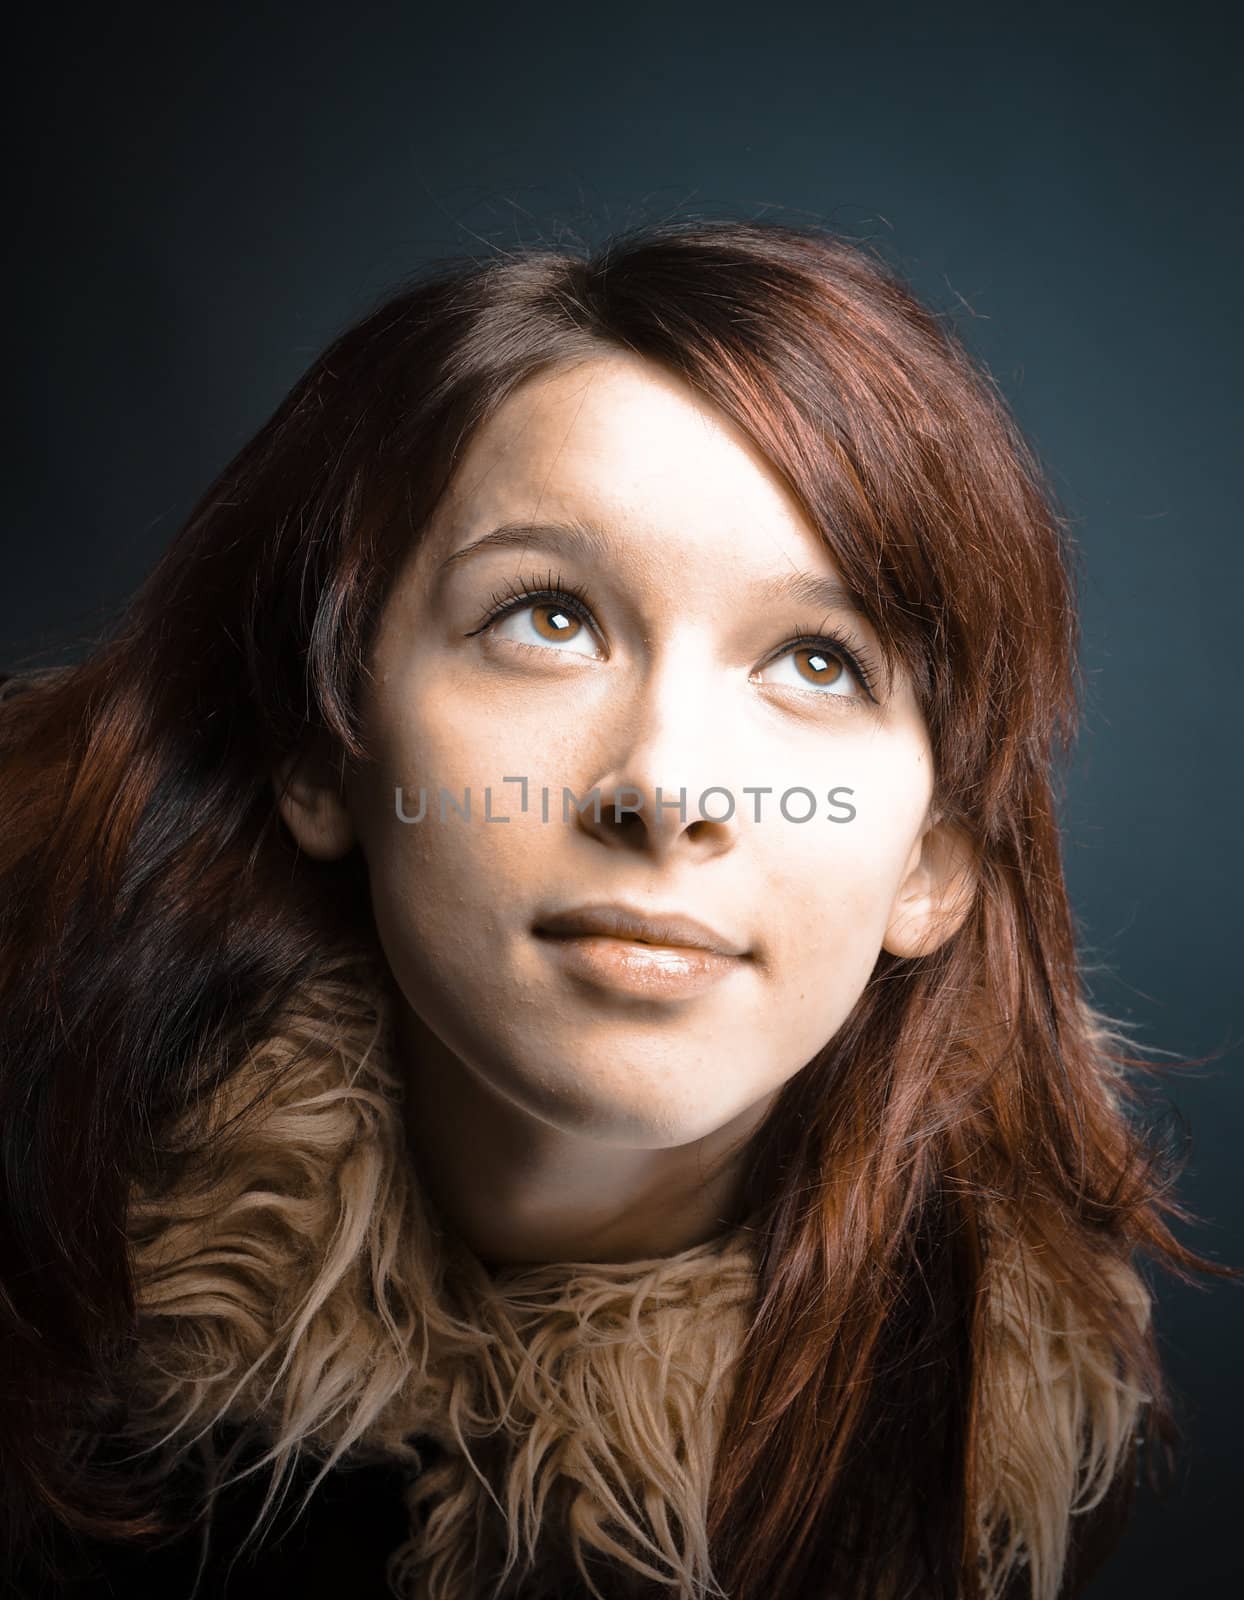 Emo look   girl with red hair on  gray background